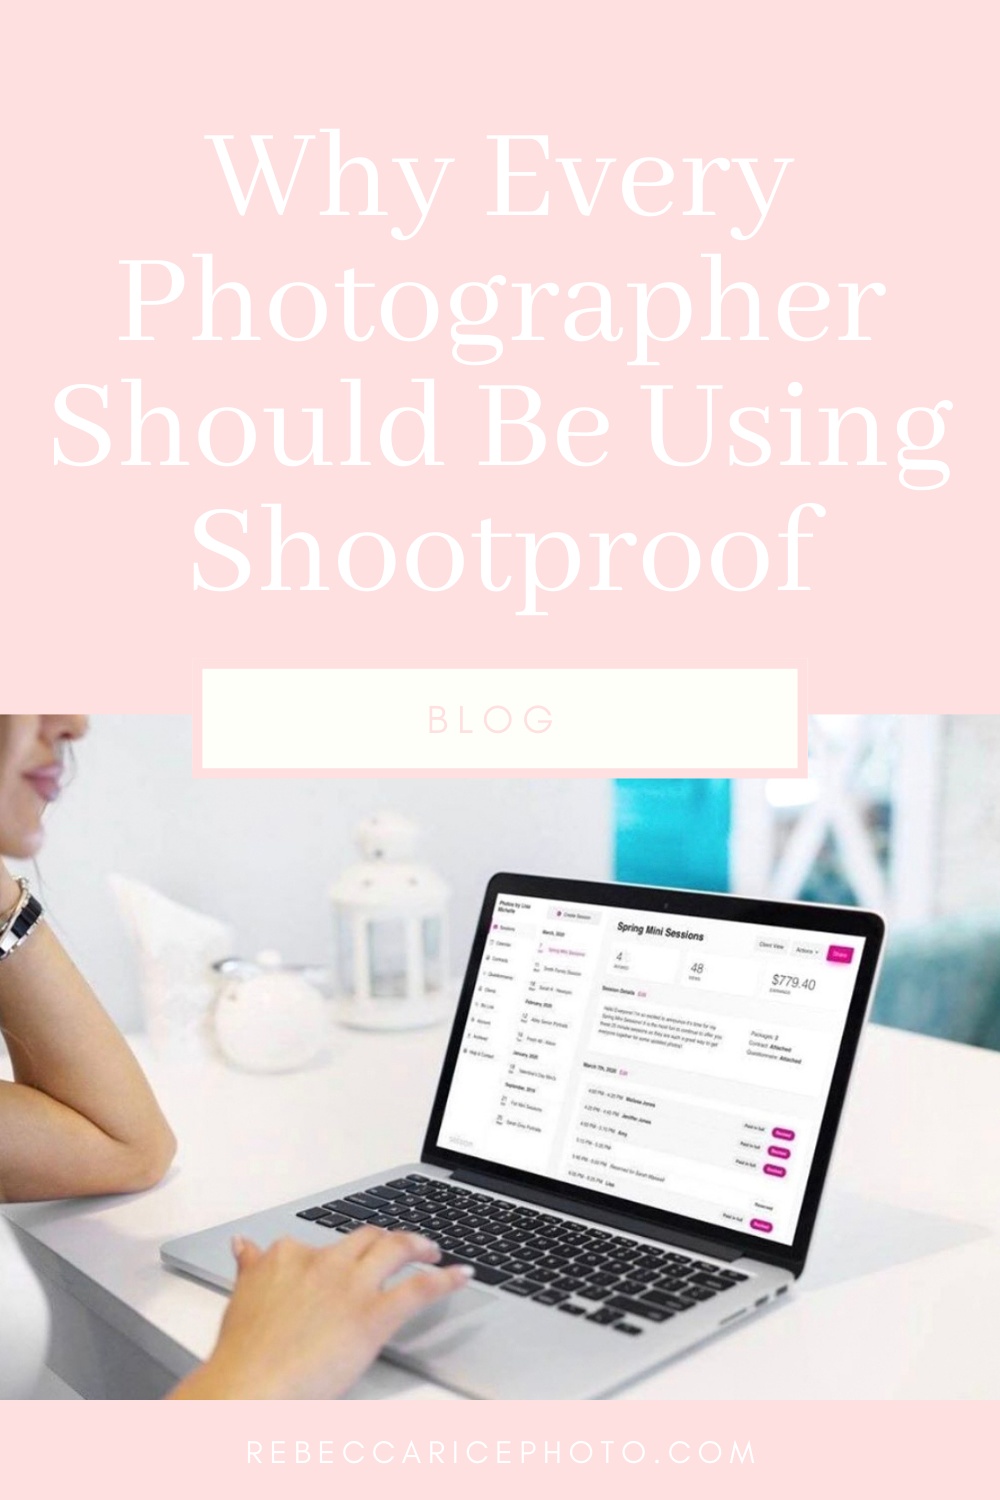 Why Every Photographer Should Be Using Shootproof - gallery delivery system